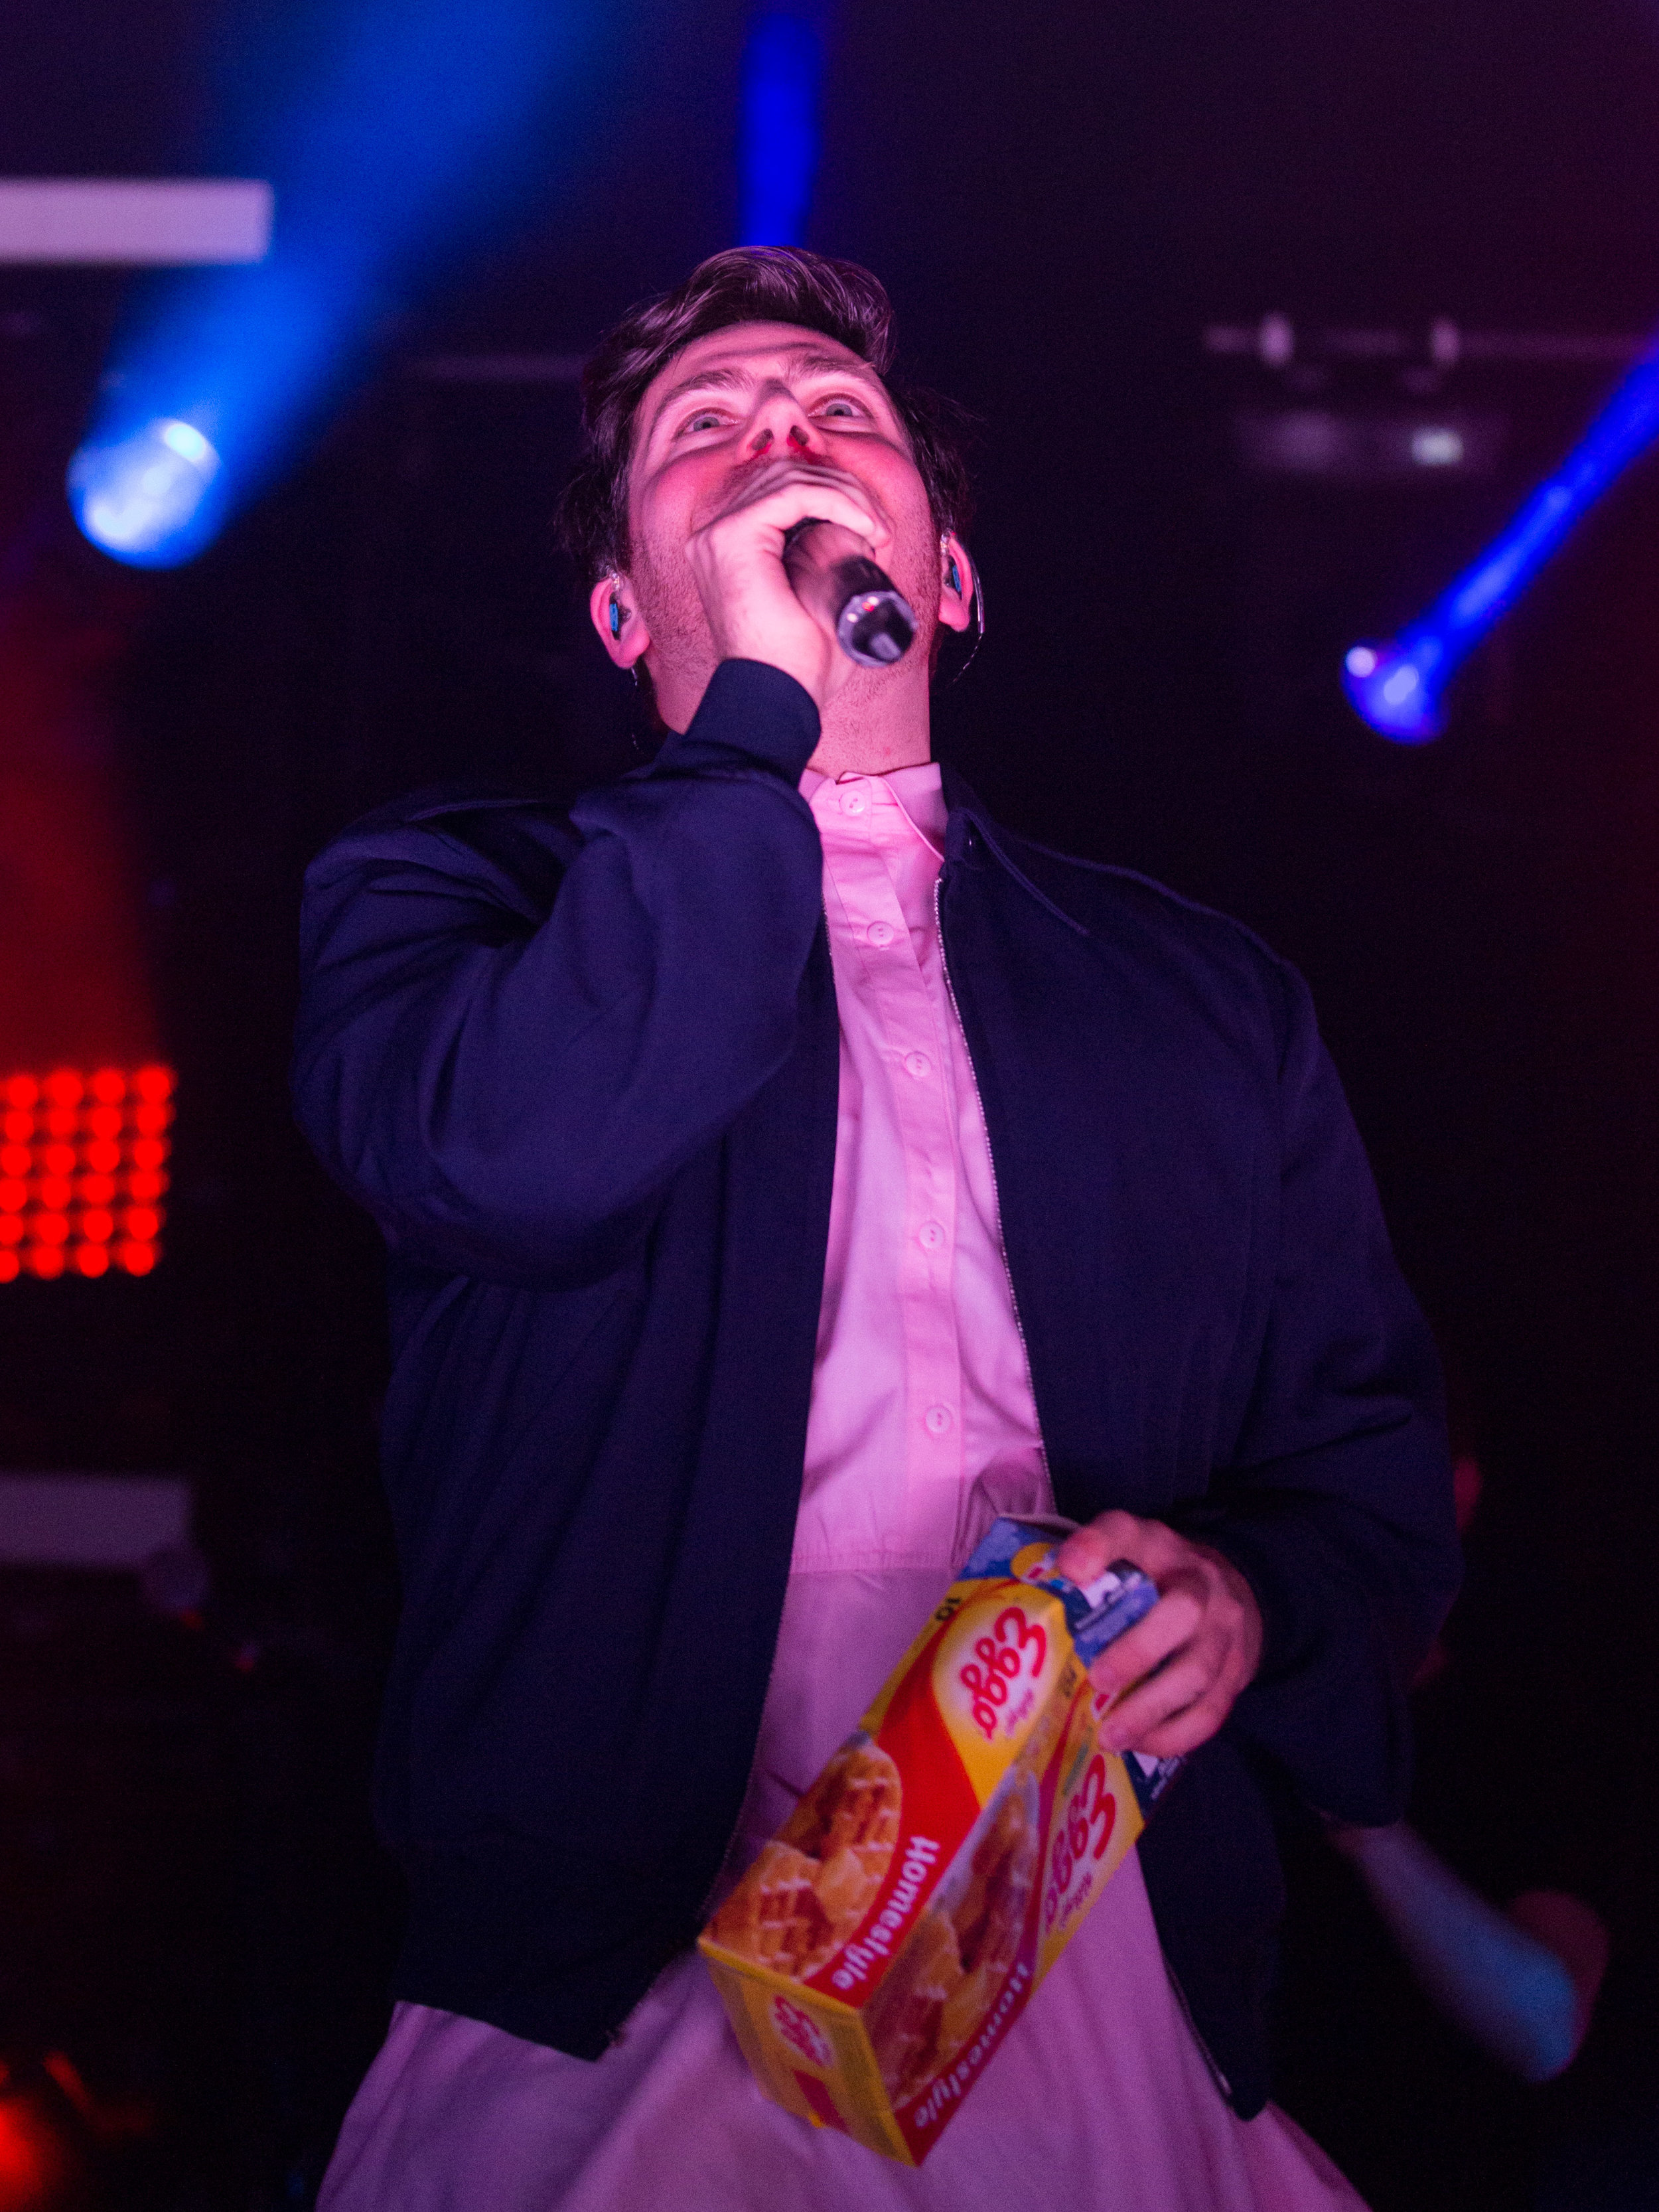  American rapper Hoodie Allen (Steven Adam Markowitz) begins his set dressed as the female character "11" from the Netflix show "Stranger Things". The second season of the show released Friday, October 27th and "11" is iconically remembered on the sh